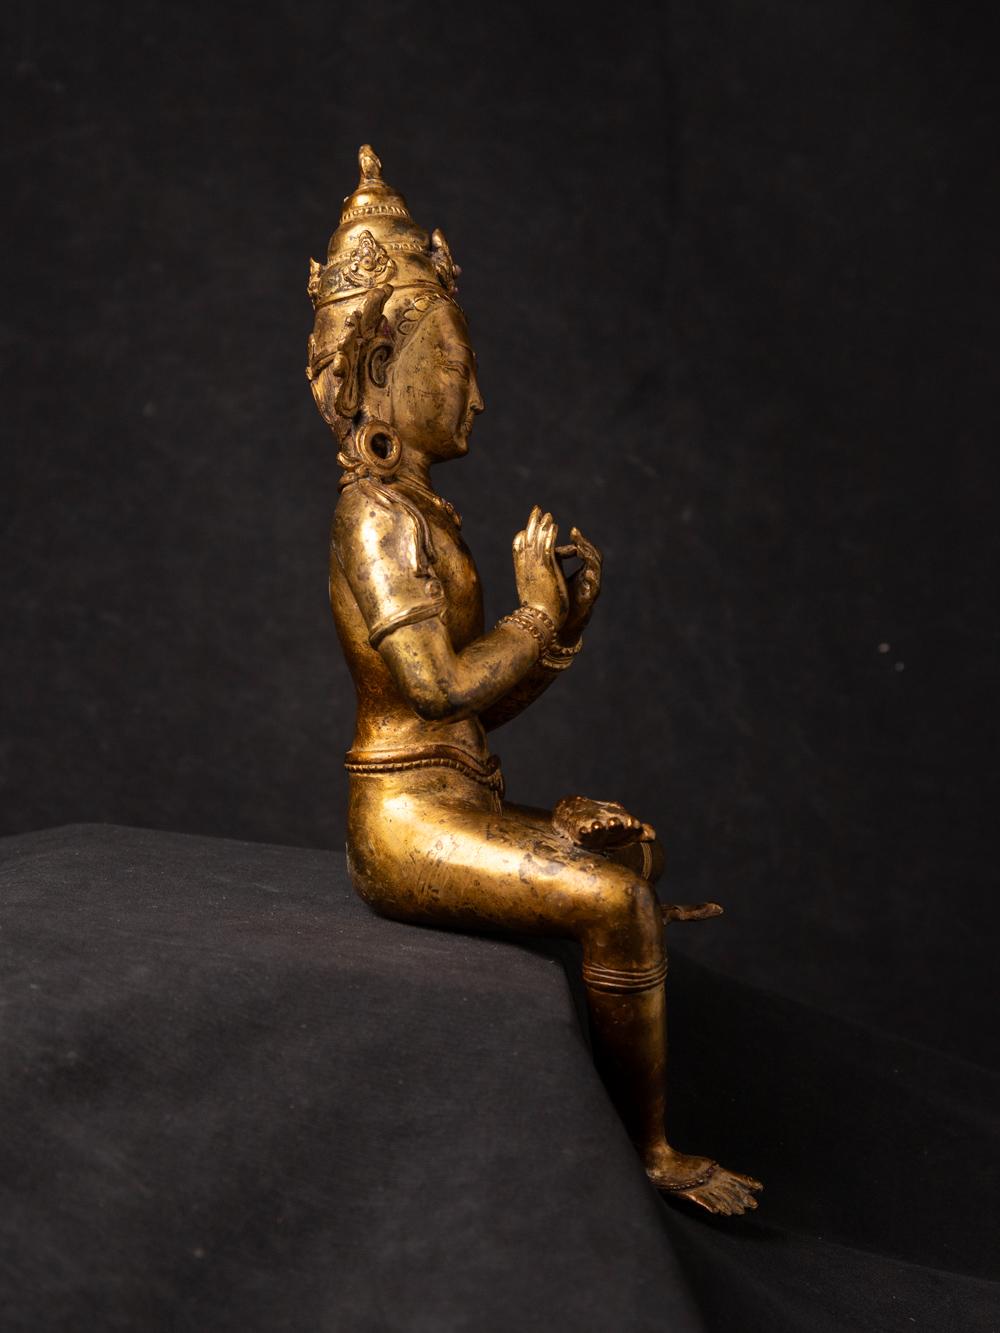 This Old bronze Nepali Bodhisattva statue is an exquisite representation of a revered figure in Tibetan Buddhism. Crafted from bronze, it stands at a height of 30 cm, with dimensions of 10.7 cm in width and 10 cm in depth, making it a beautifully